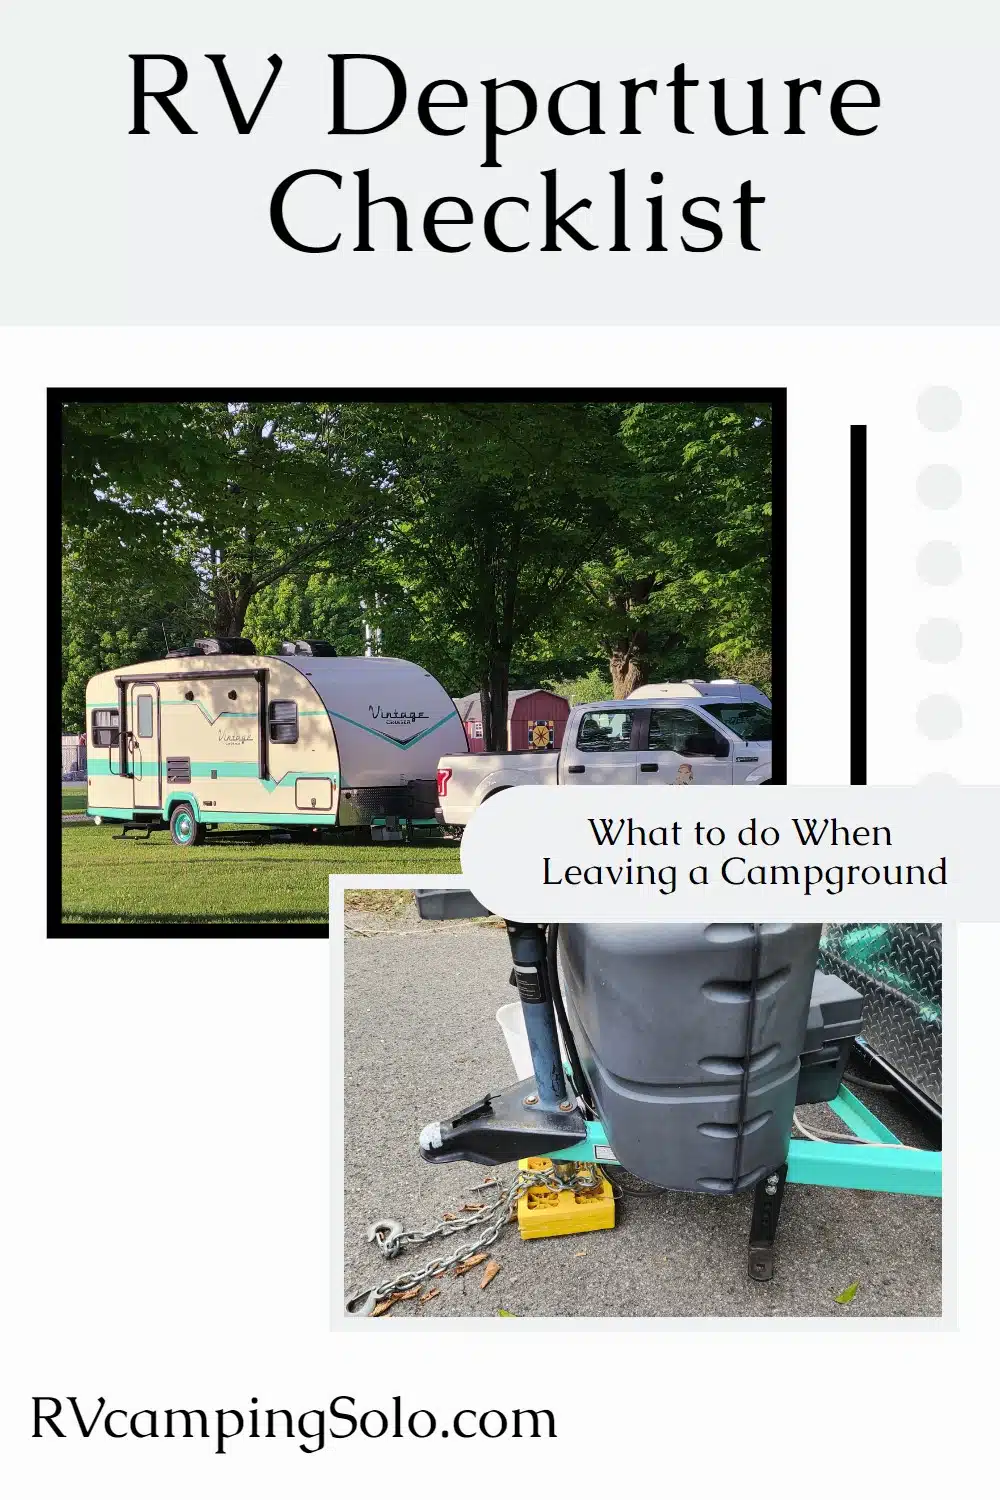 What to do when departing a campground. You've had your fun, don't mess up by missing an important step before you depart the campground. #RVcampingSOLO via @repurposedlife